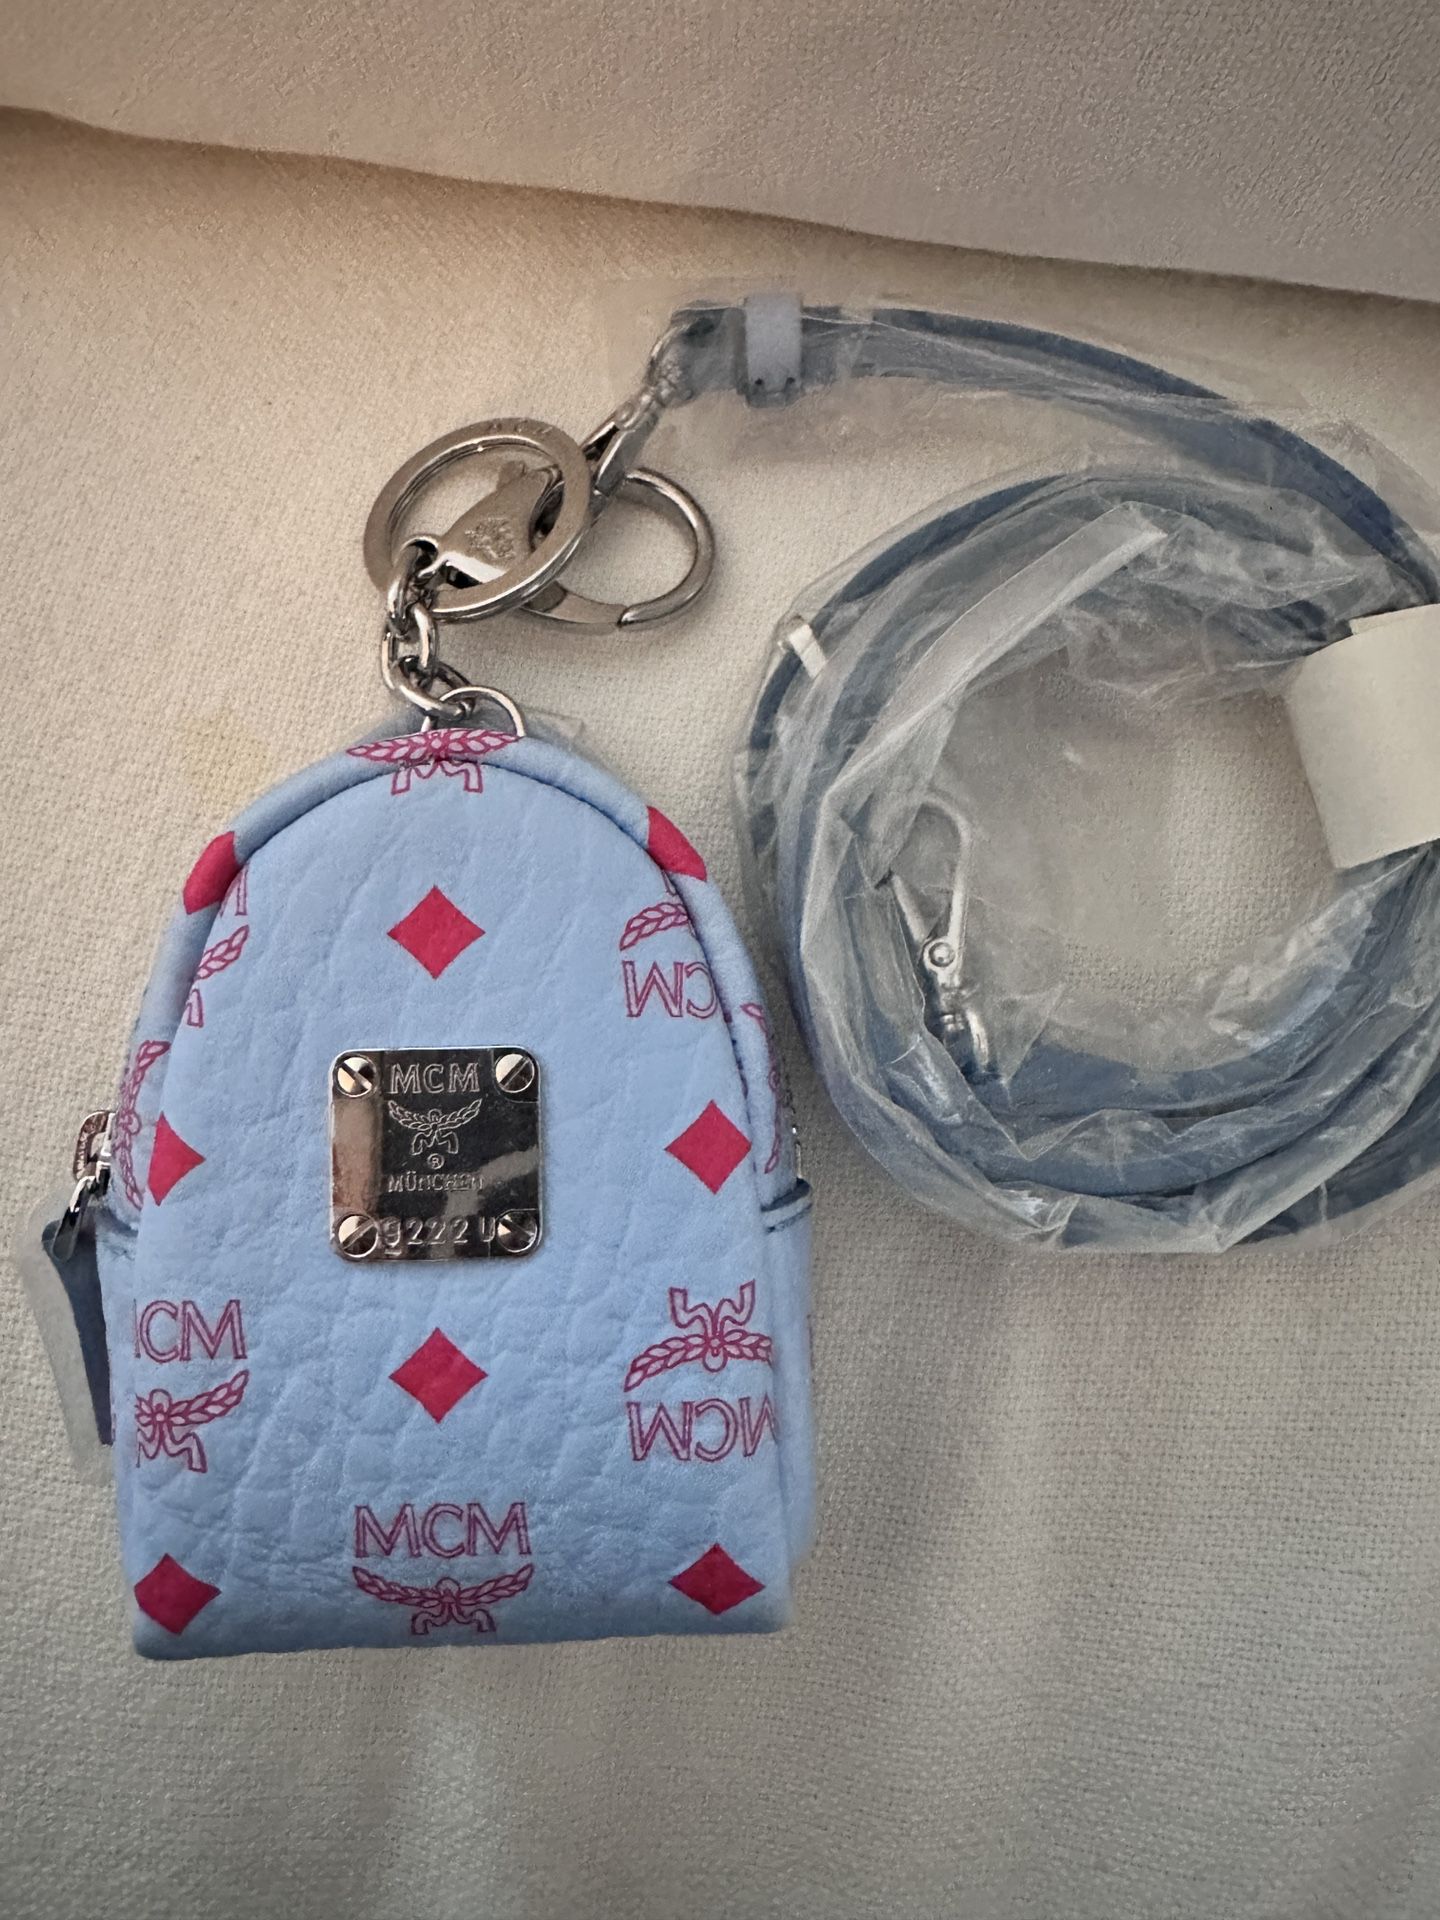 mcm keychain wallet Backpack  blue new never use 